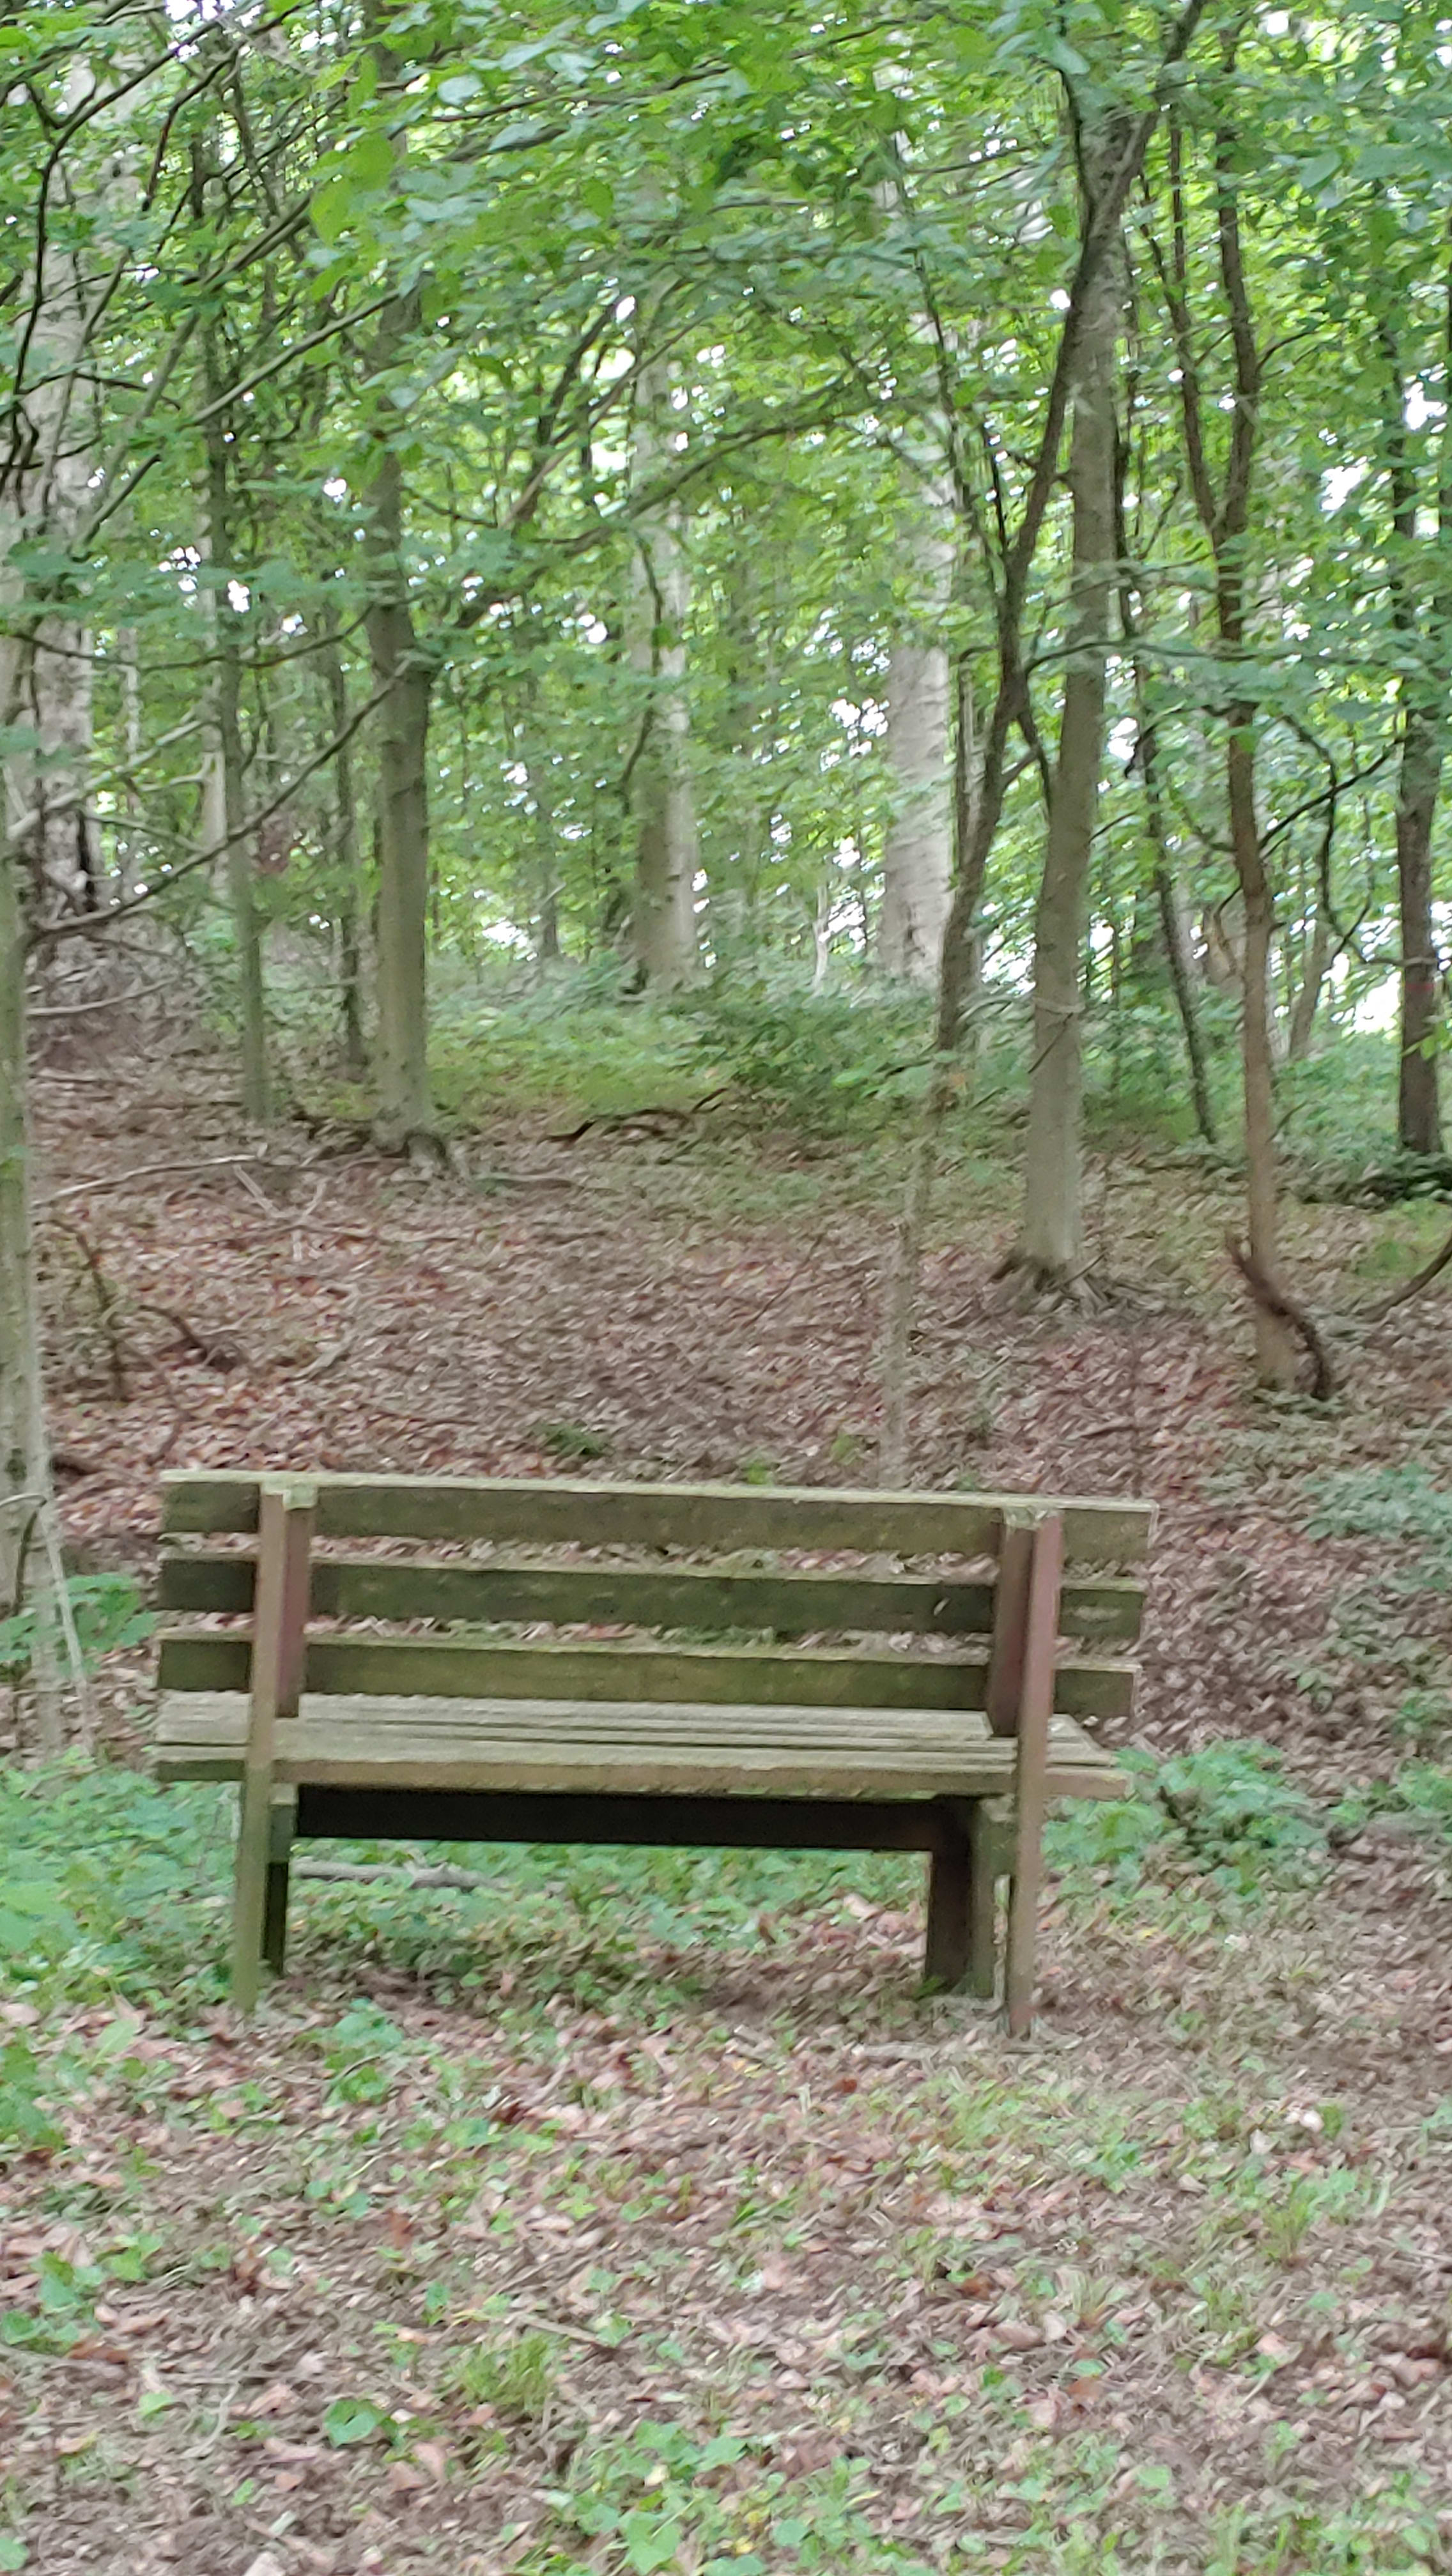 Catch your breath after hiking to back of woods. Sit and enjoy the view of the mature beech and oak woods.